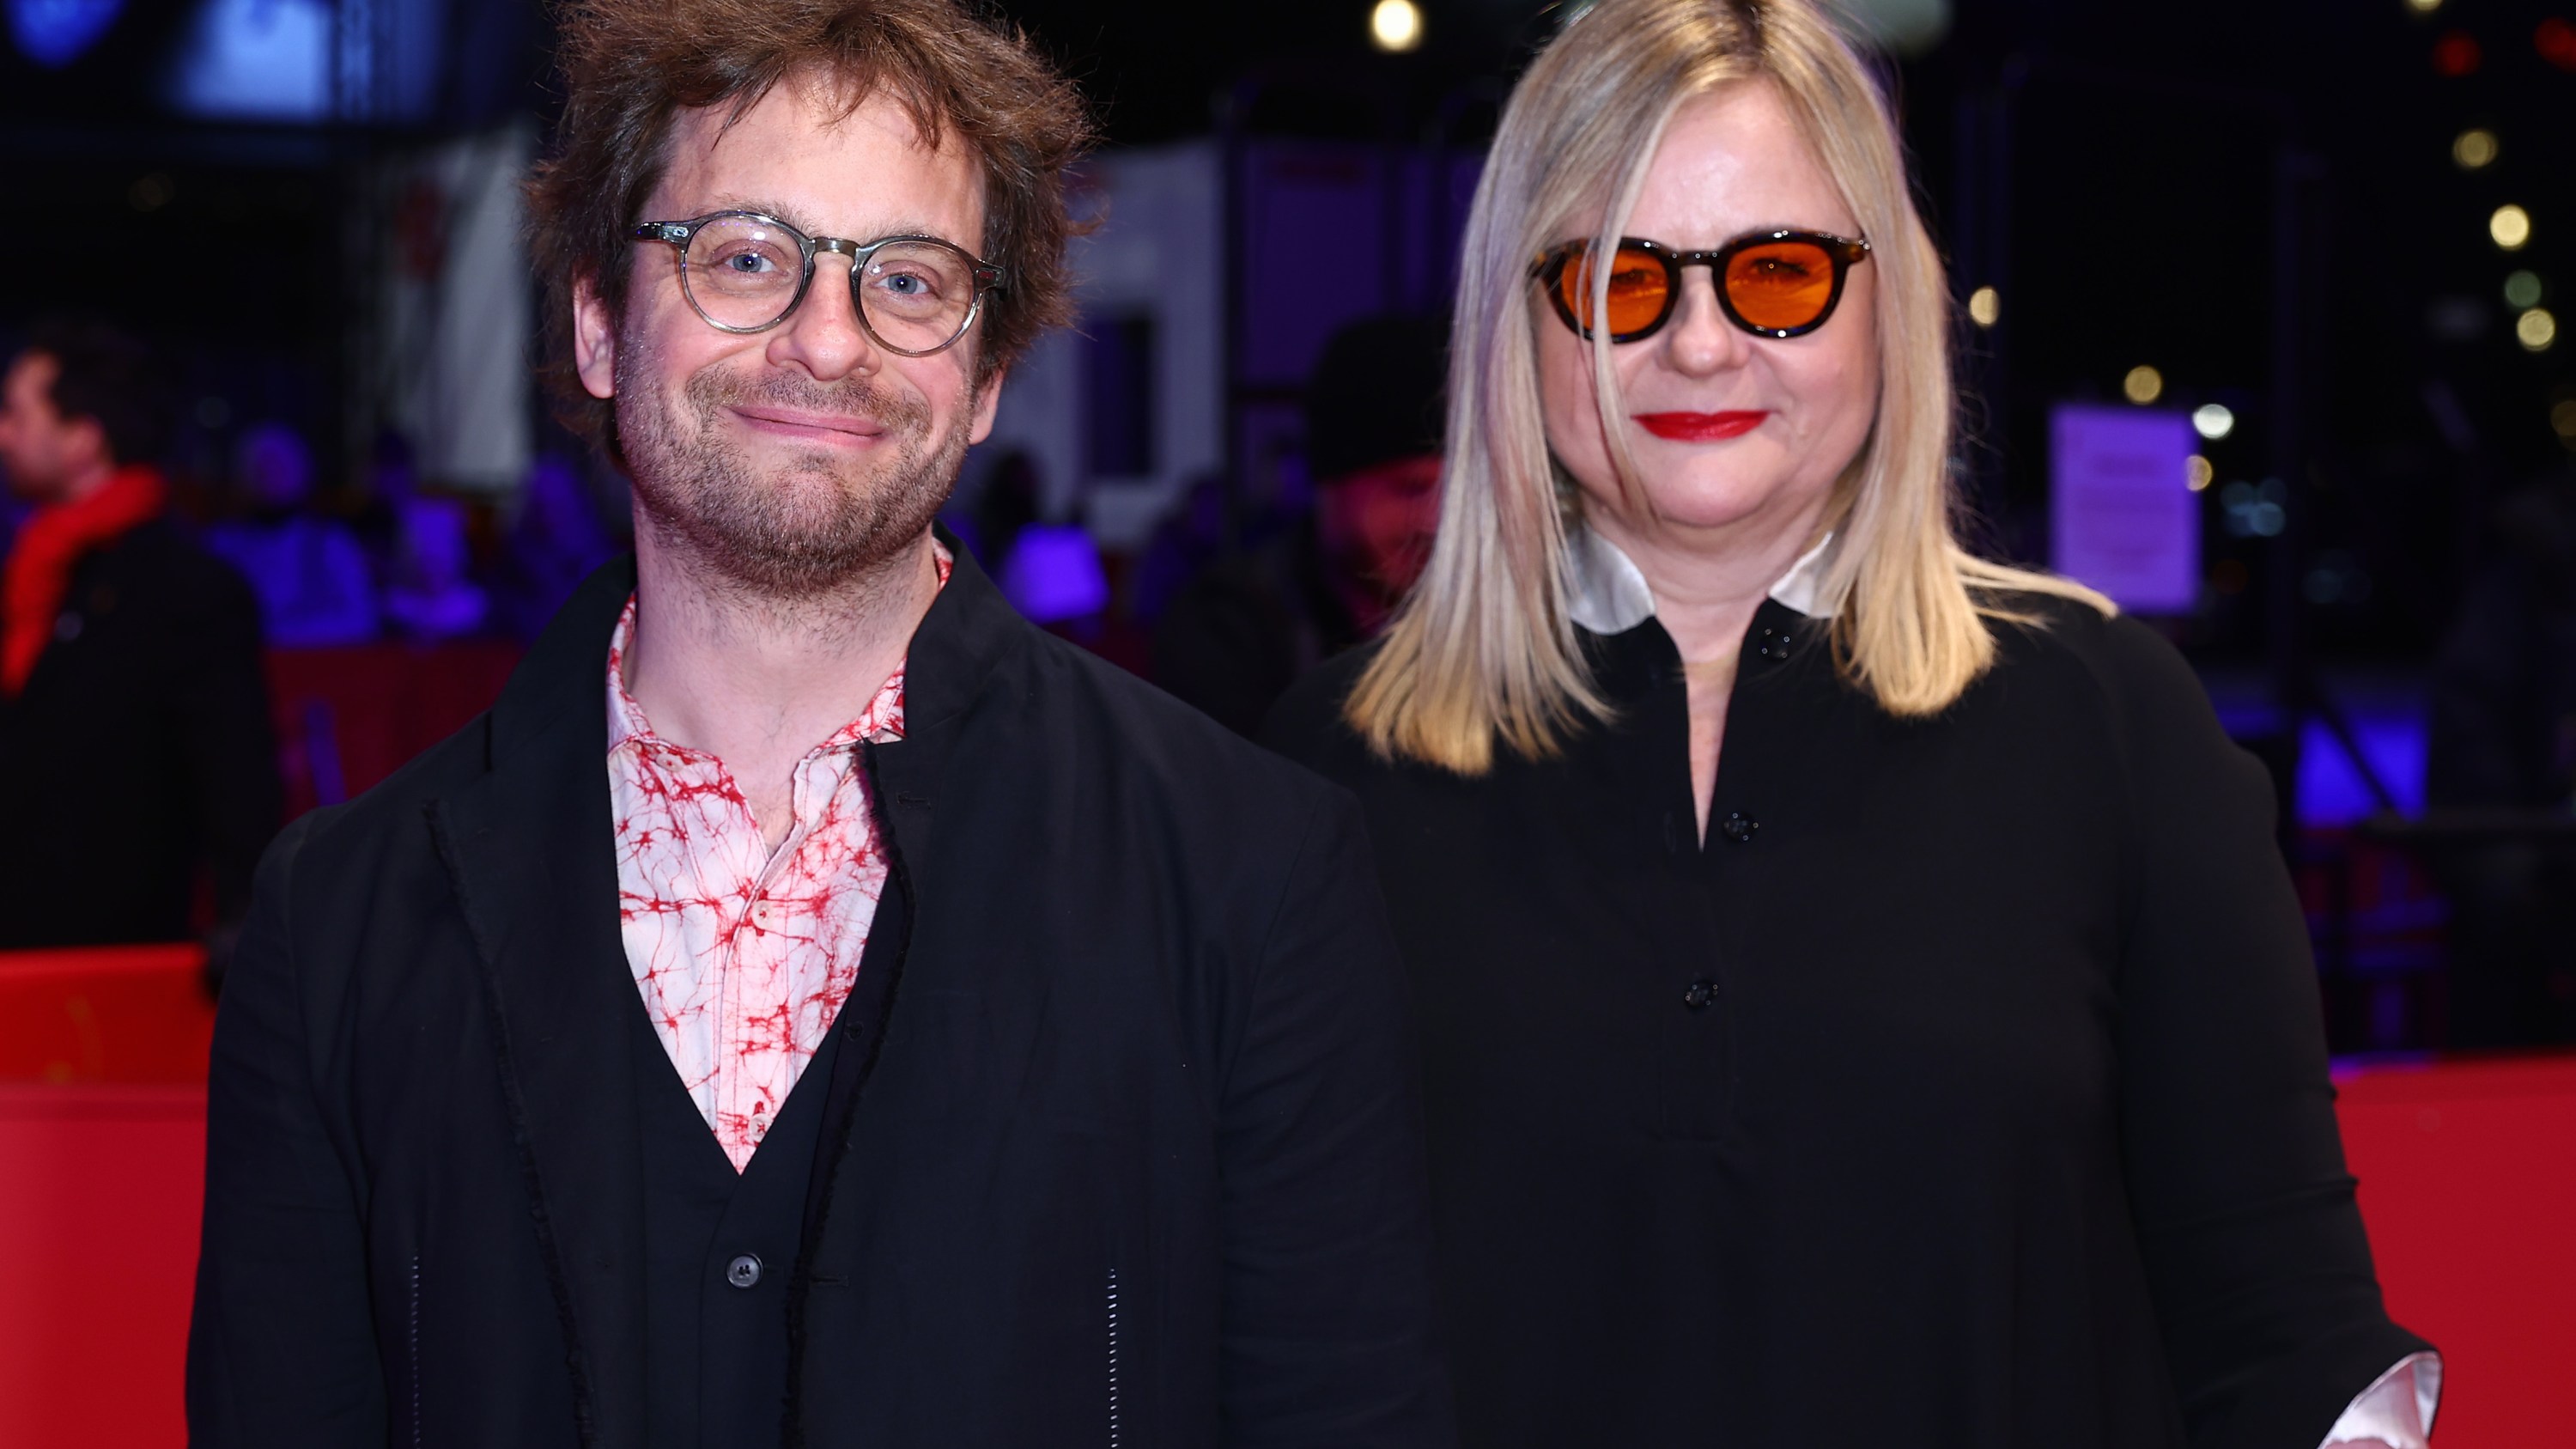 BERLIN, GERMANY - FEBRUARY 20: Severin Fiala and Veronika Franz attends the 'Devil's Bath' premiere during the 74th Berlinale International Film Festival Berlin at Berlinale Palast on February 20, 2024 in Berlin, Germany. (Photo by Sebastian Reuter/Getty Images)